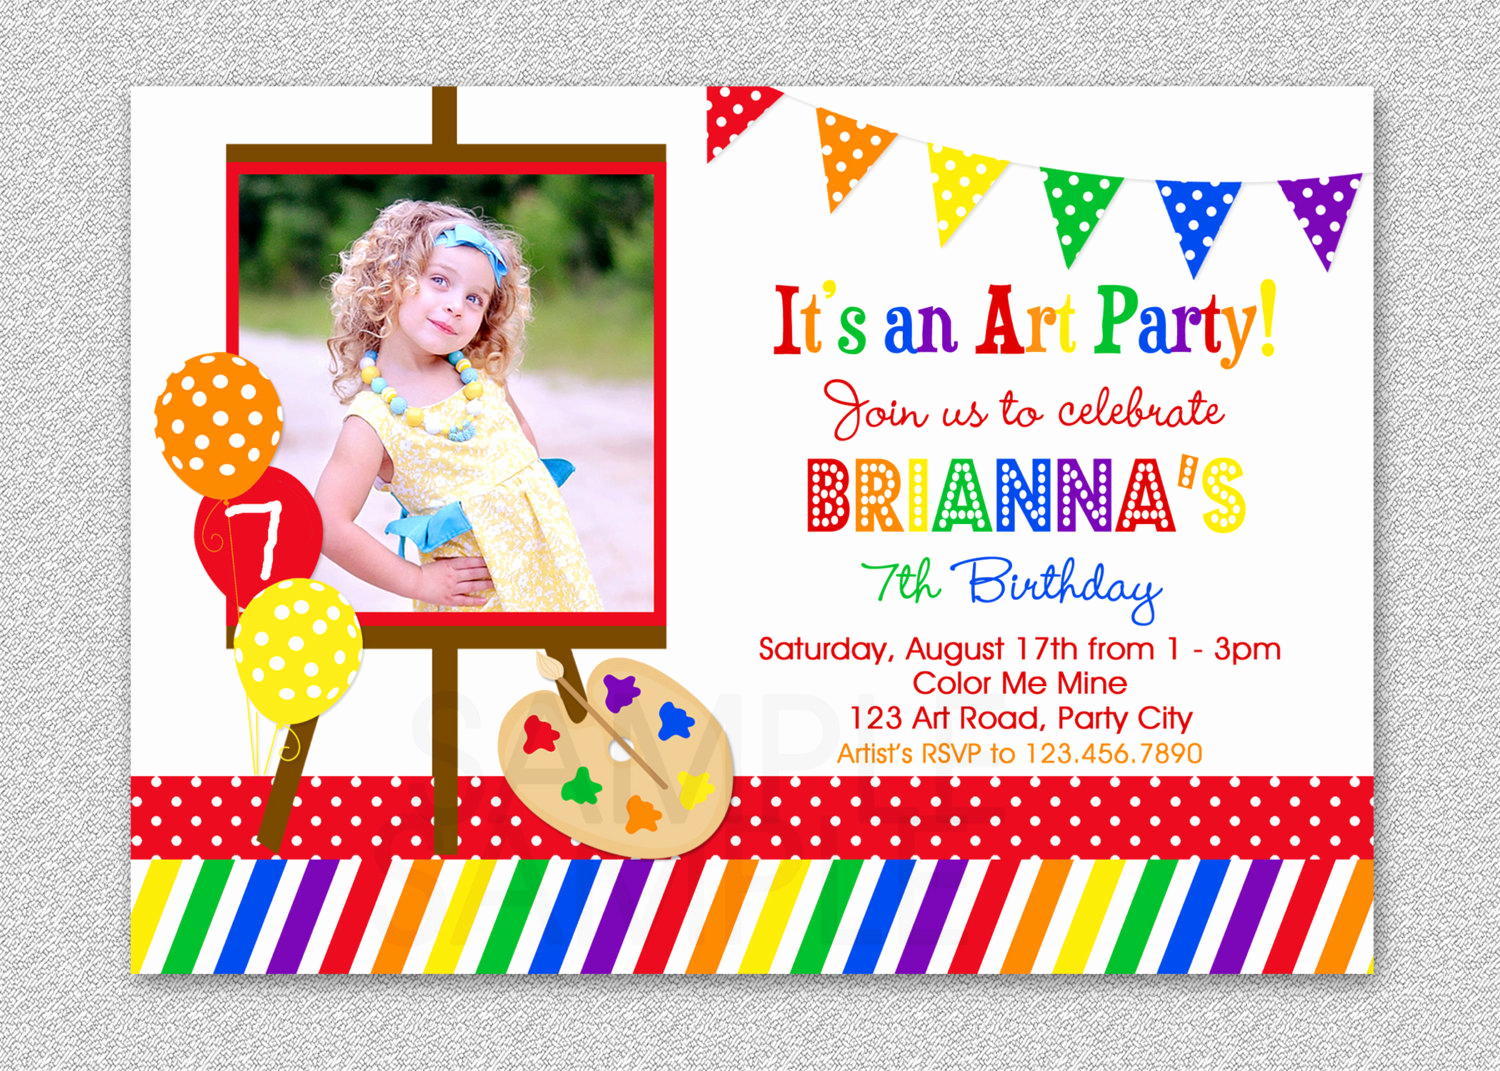 Art Party Invitation Template Beautiful Art Birthday Party Invitations for Your Kids – Bagvania